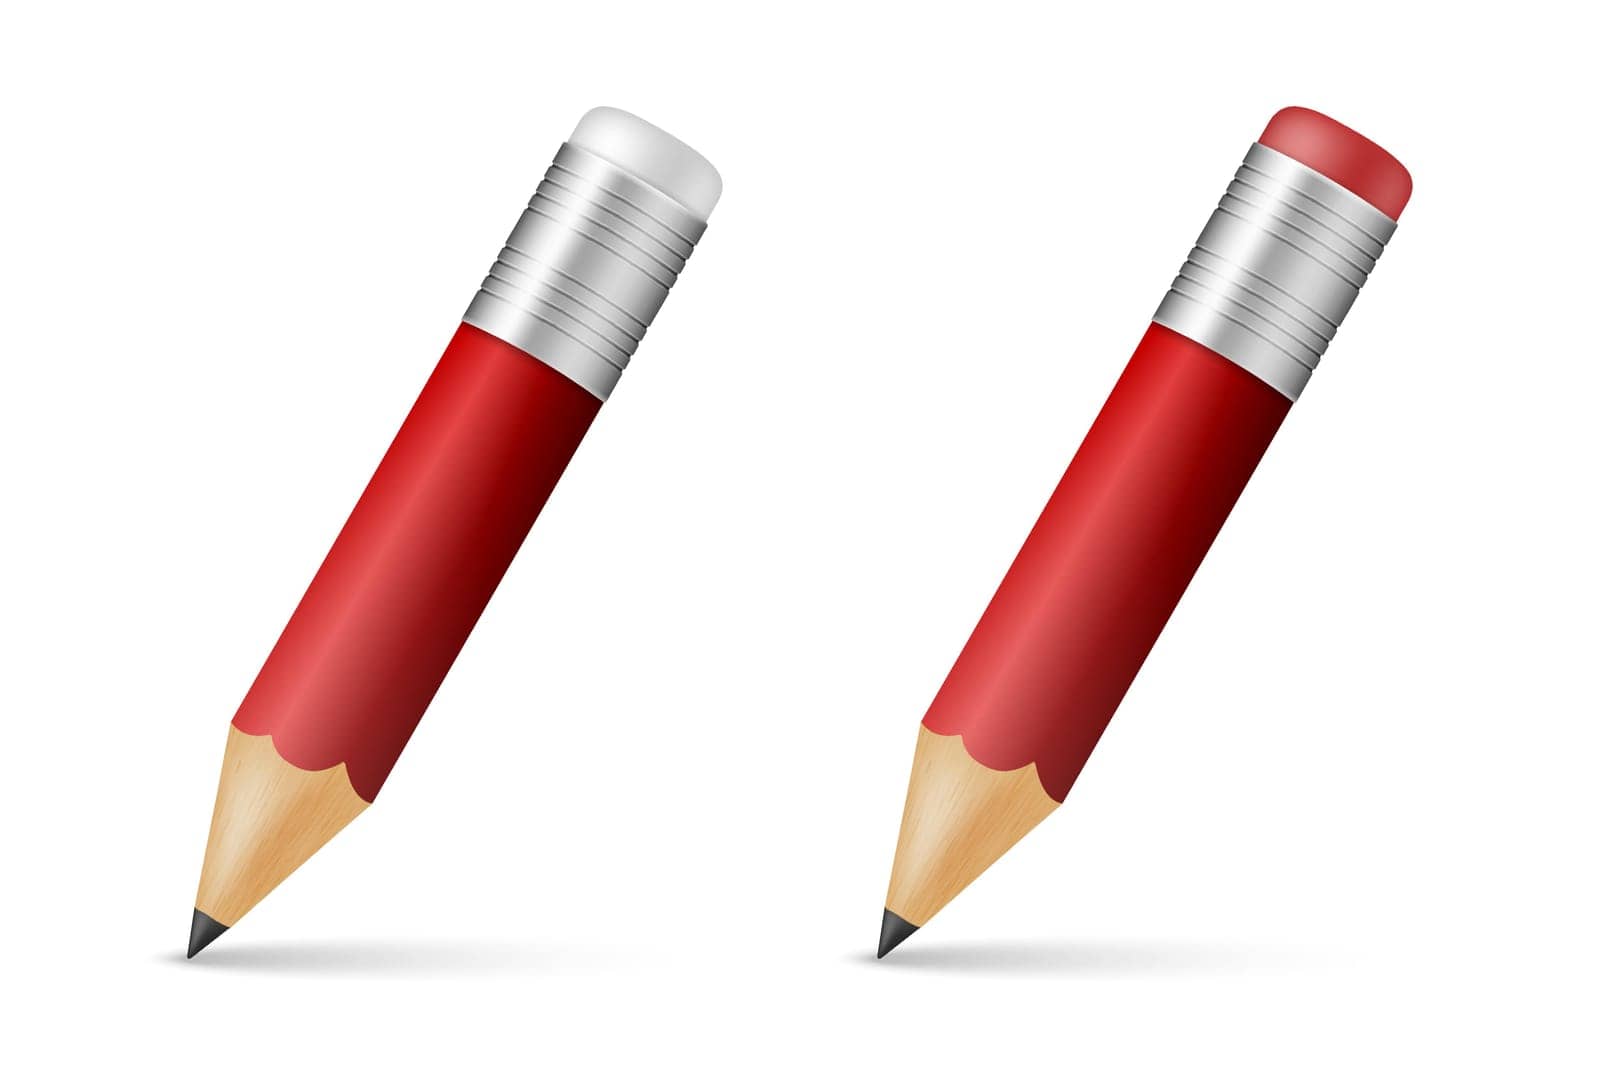 Red wooden sharp pencils isolated on a white background. Vector EPS10 illustration.